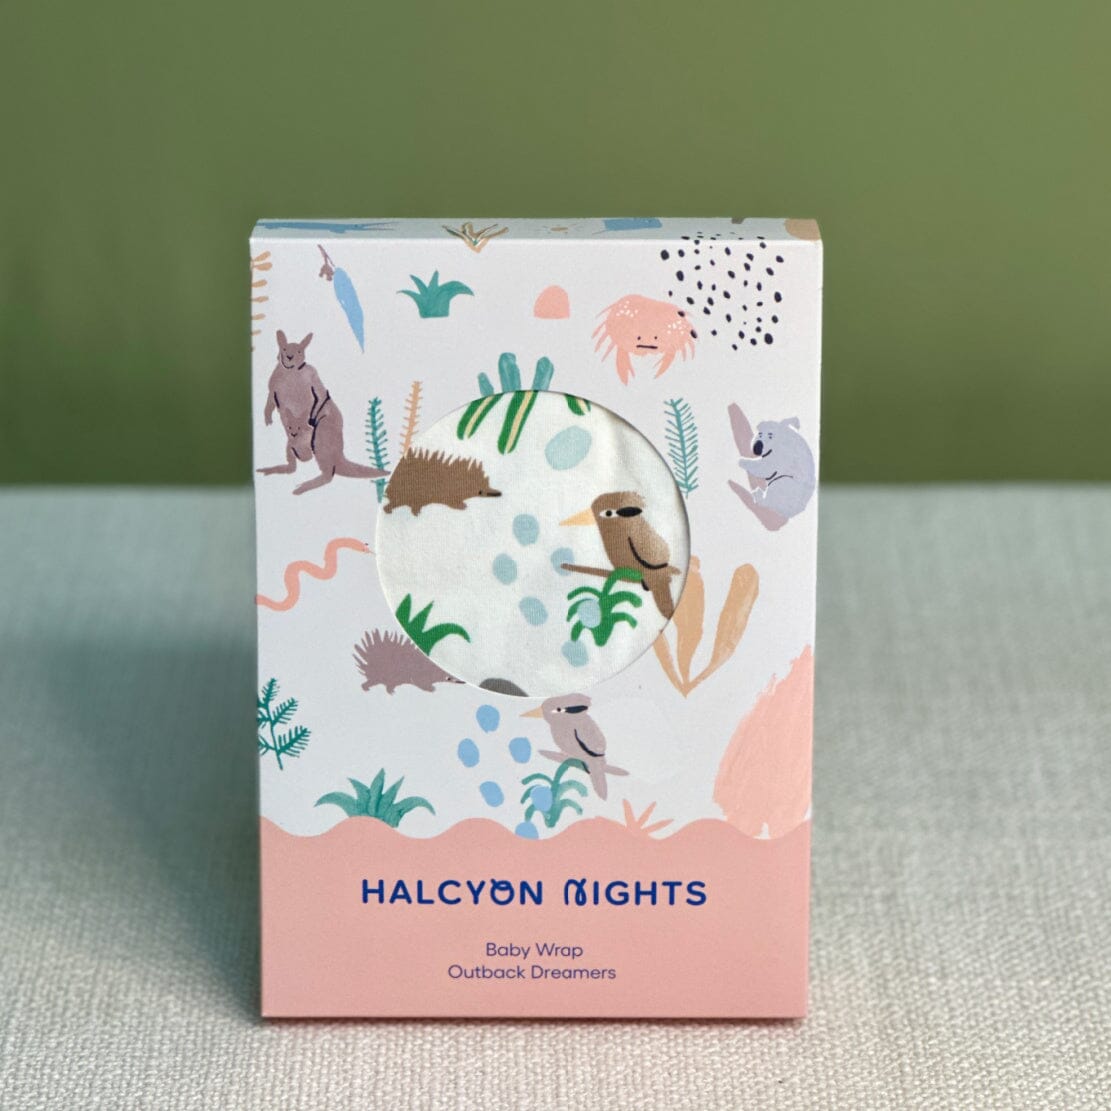 Same day new baby gift delivery | Australia-wide baby gift delivery | Buy Halcyon Nights Online